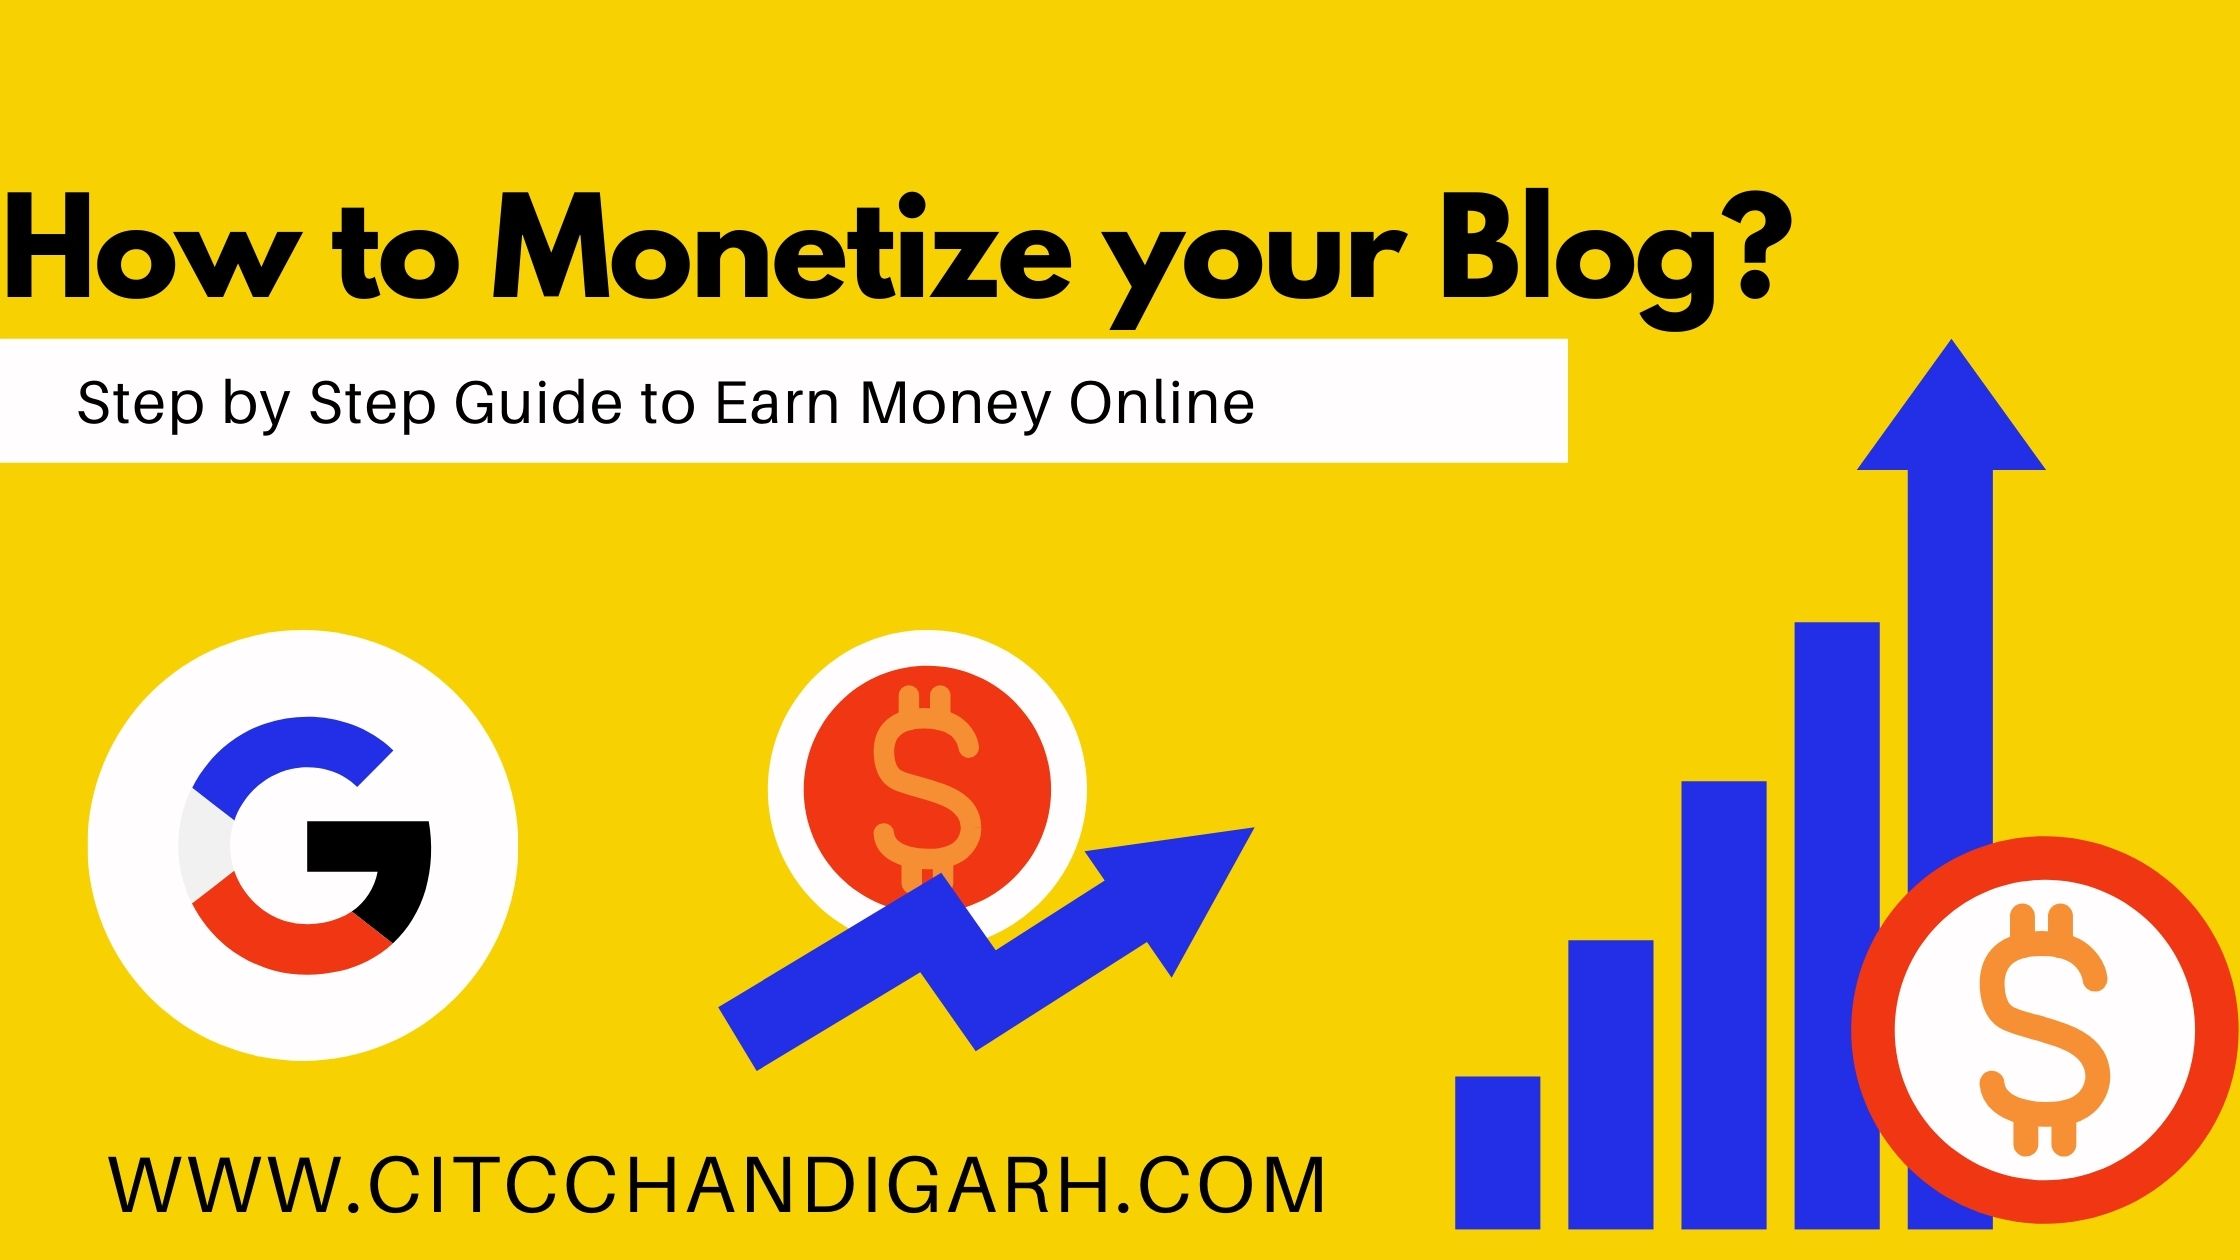 How to Monetize your Blog